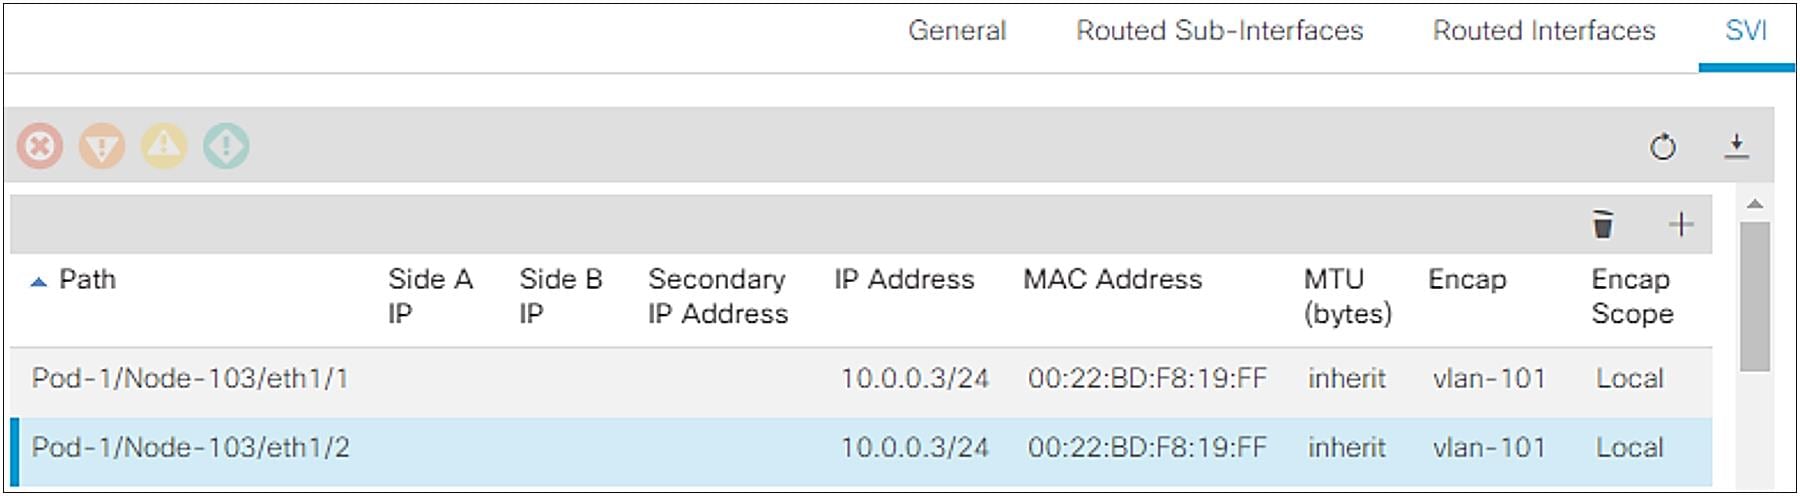 How to configure the same VLAN on two different Paths as an SVI